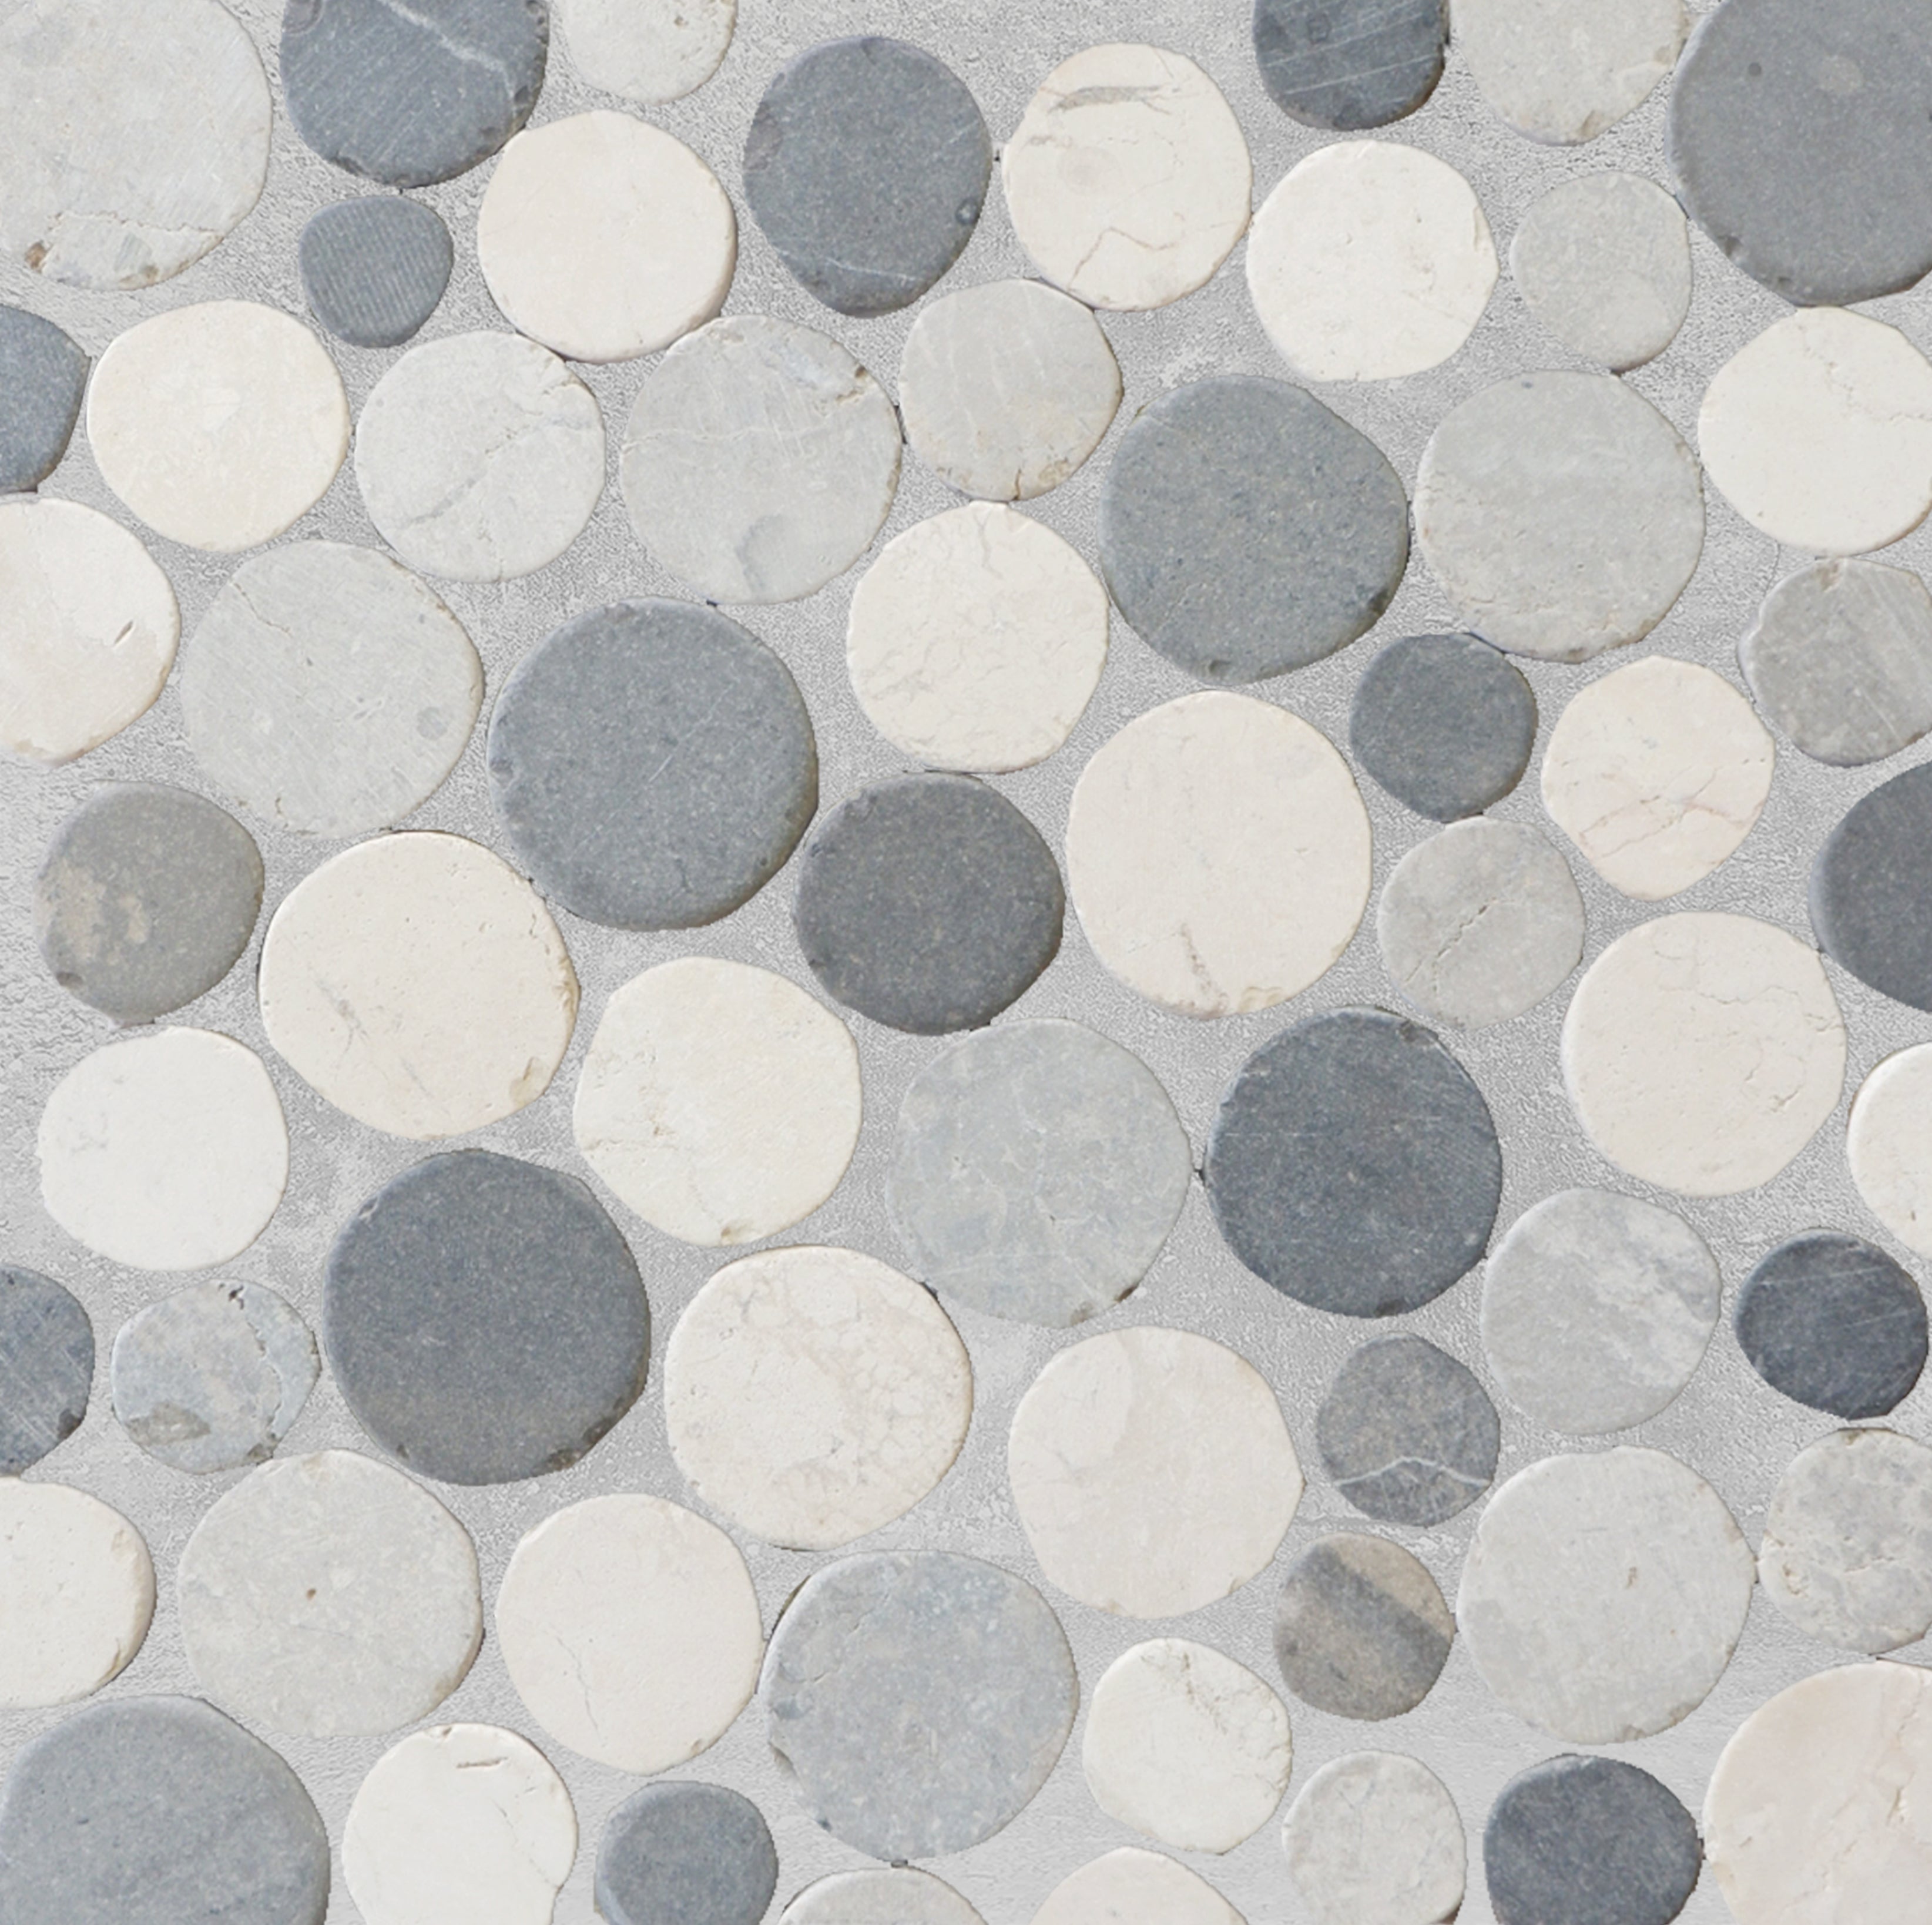 Bali mix pebble tile sample close up with grout